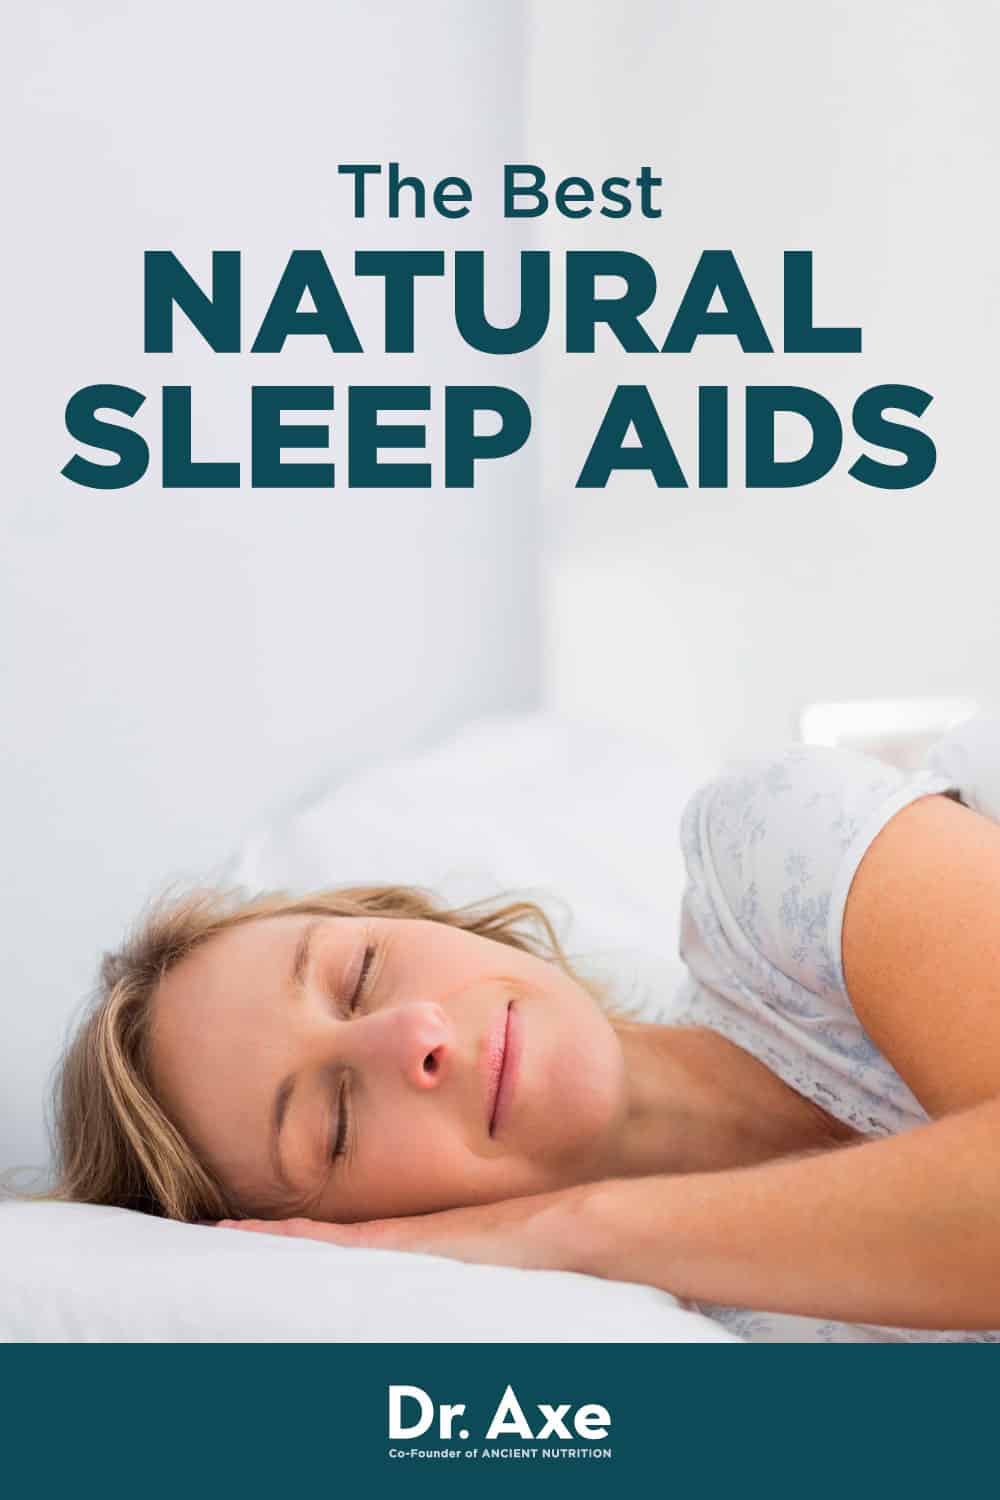 7 Natural Sleep Aids That Work To Improve Sleep And Health Dr Axe